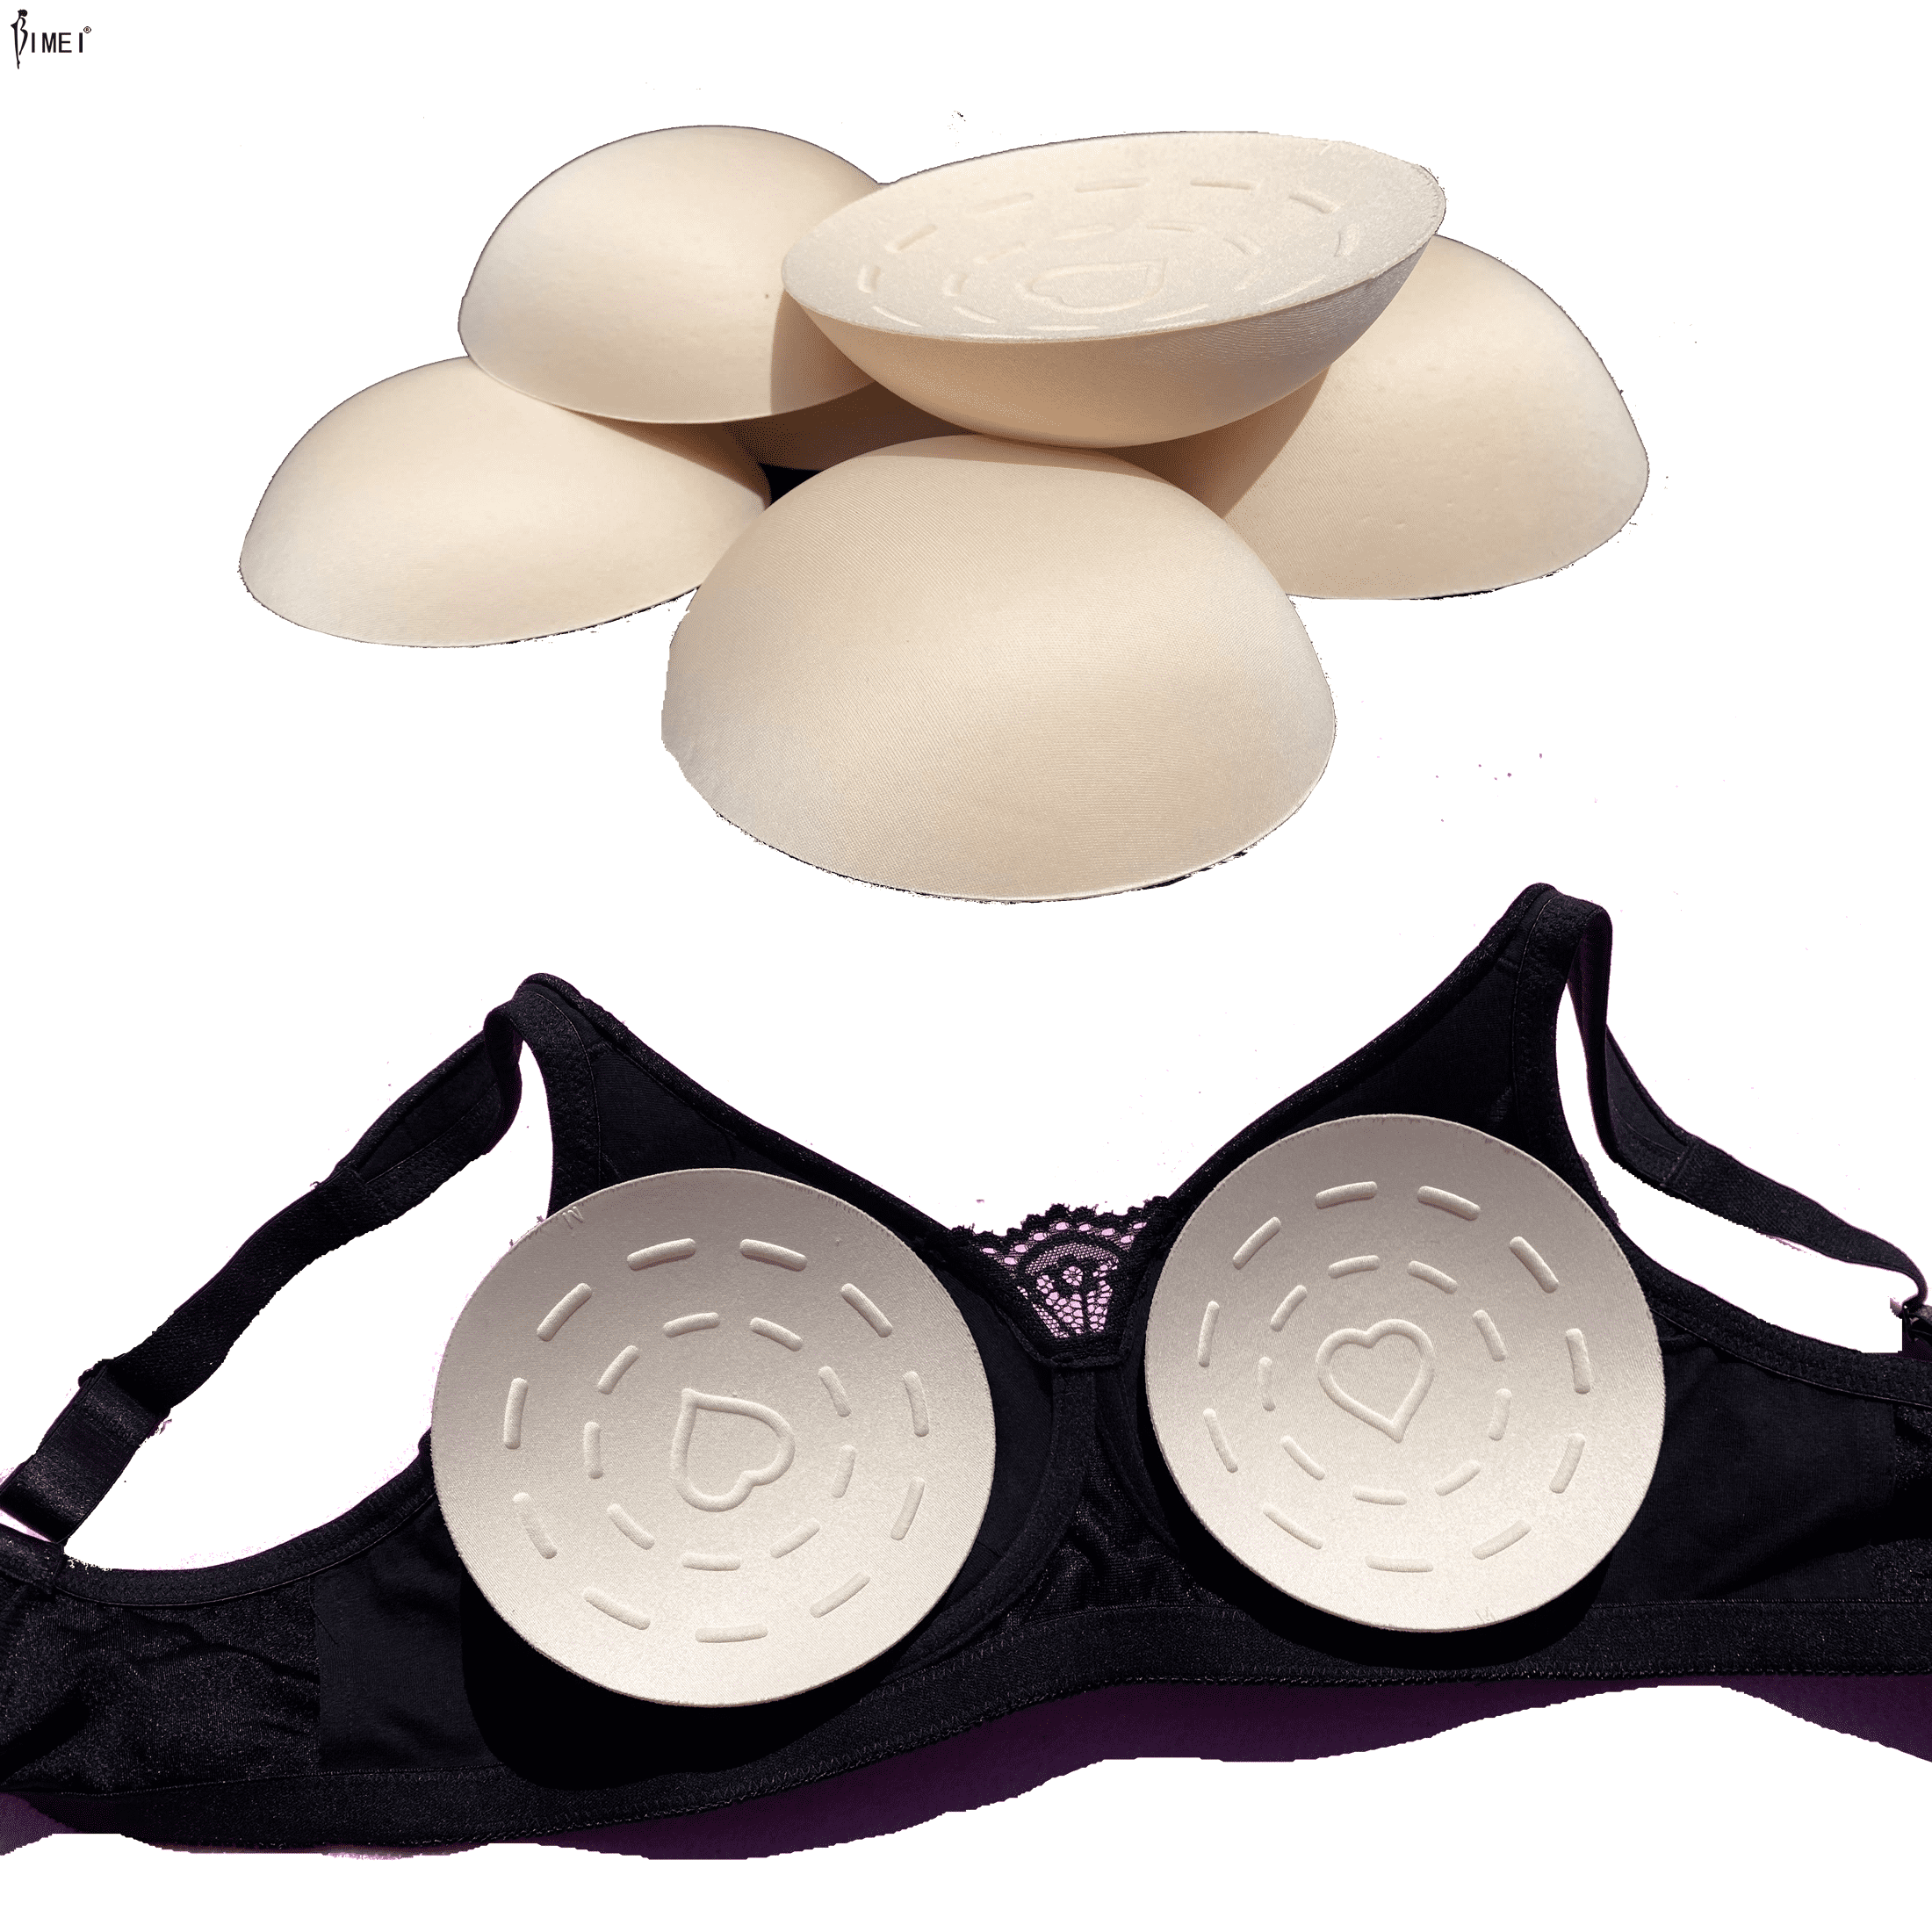 BIMEI Round Soft Bra Inserts Pads A Pair for Sports Bras Women's